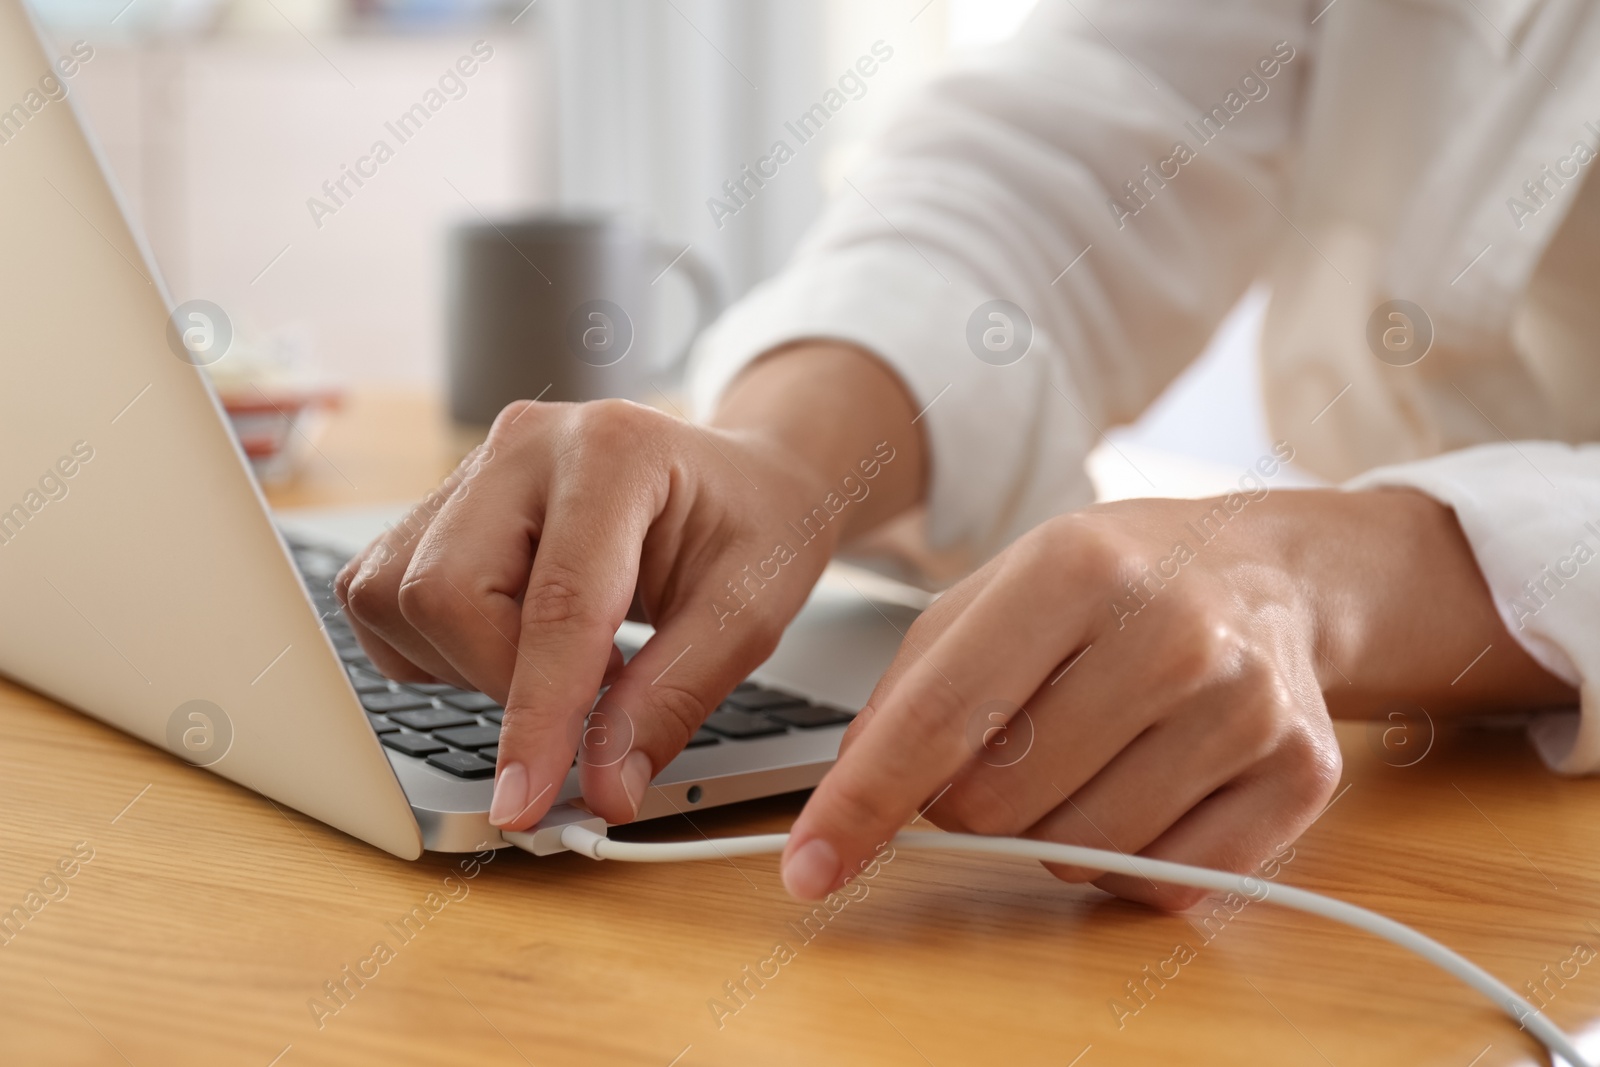 Photo of Woman connecting charger cable to laptop at wooden table, closeup